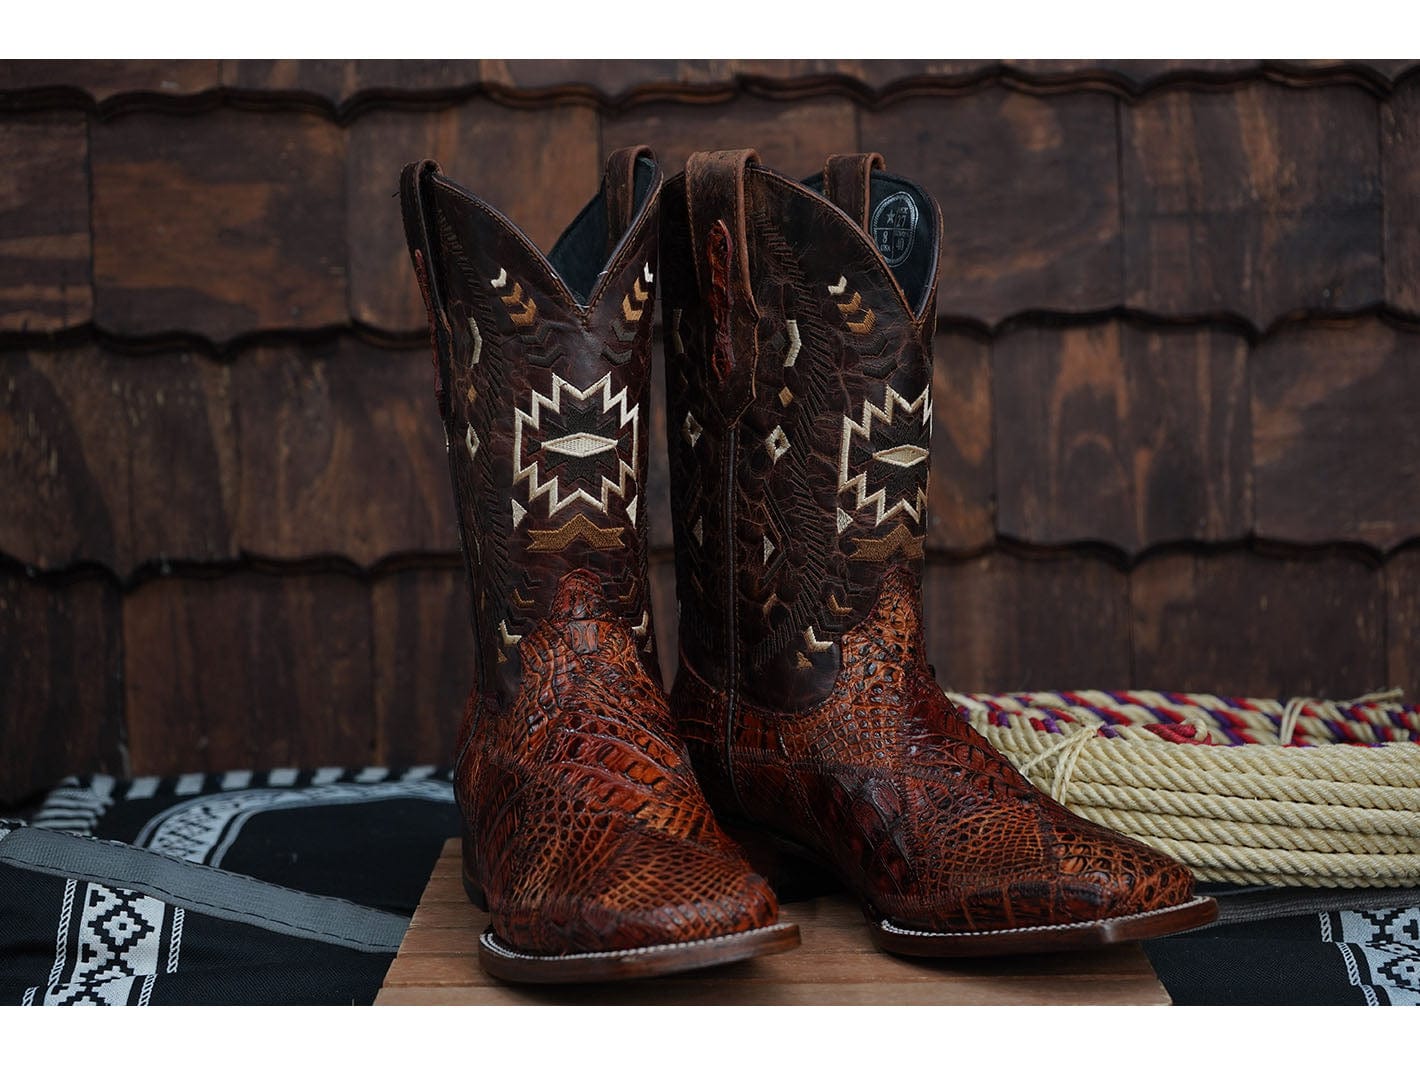 TENT SALE! Texas Country Western Boot Caiman Rombos Orix, Cognac, & Shedron Square Toe